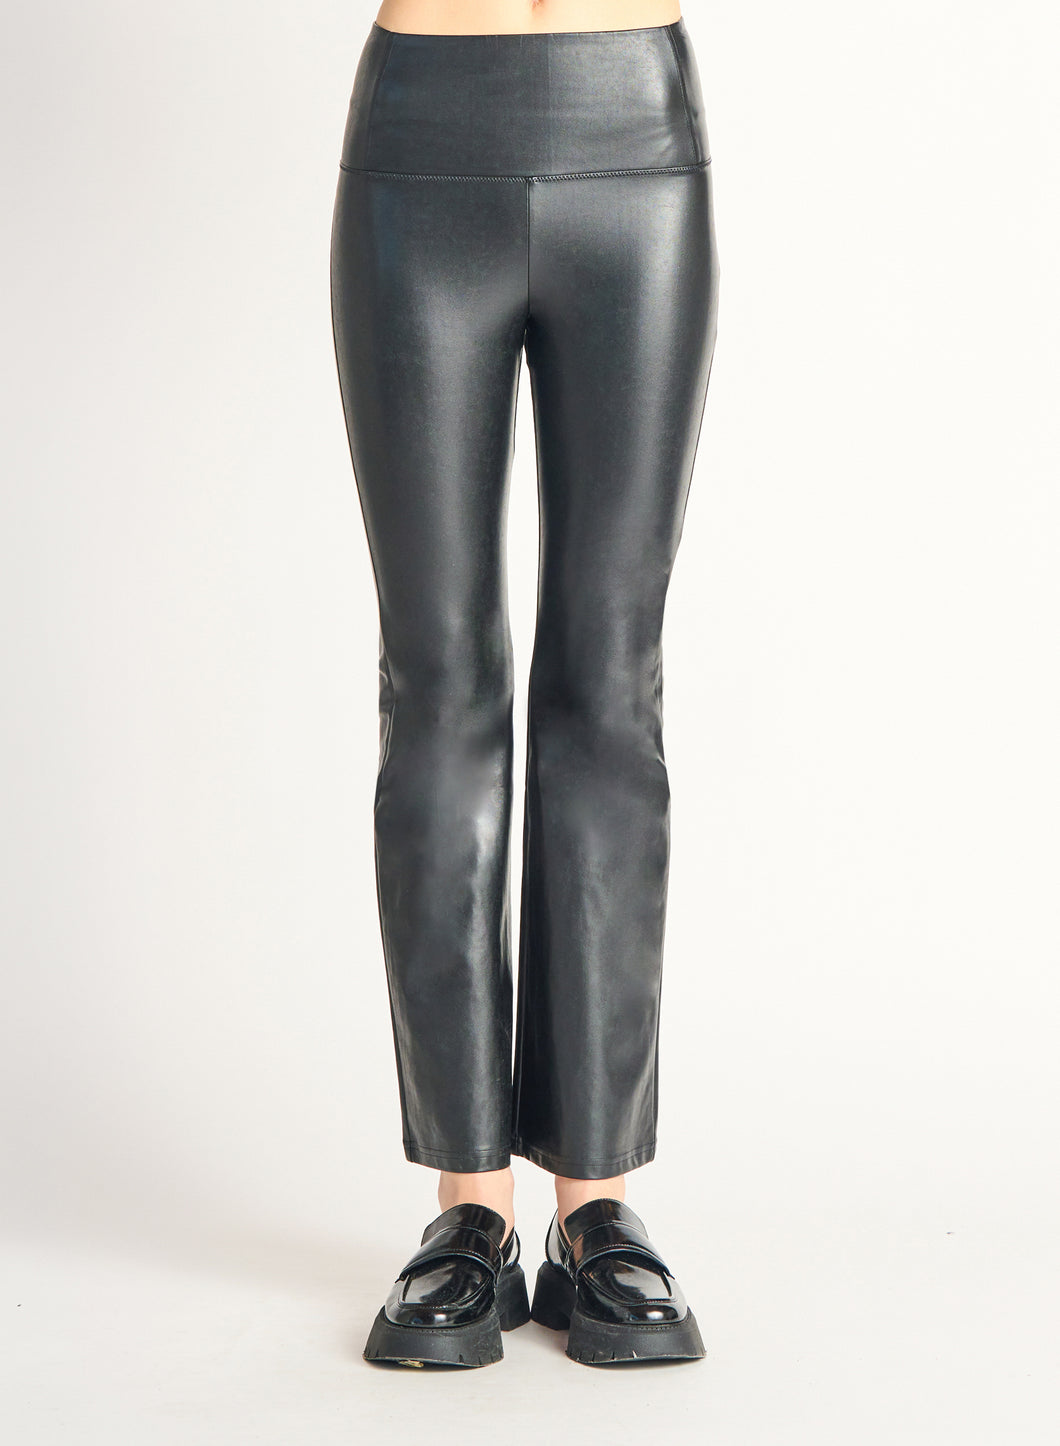 FLARED FAUX LEATHER LEGGING by Dex